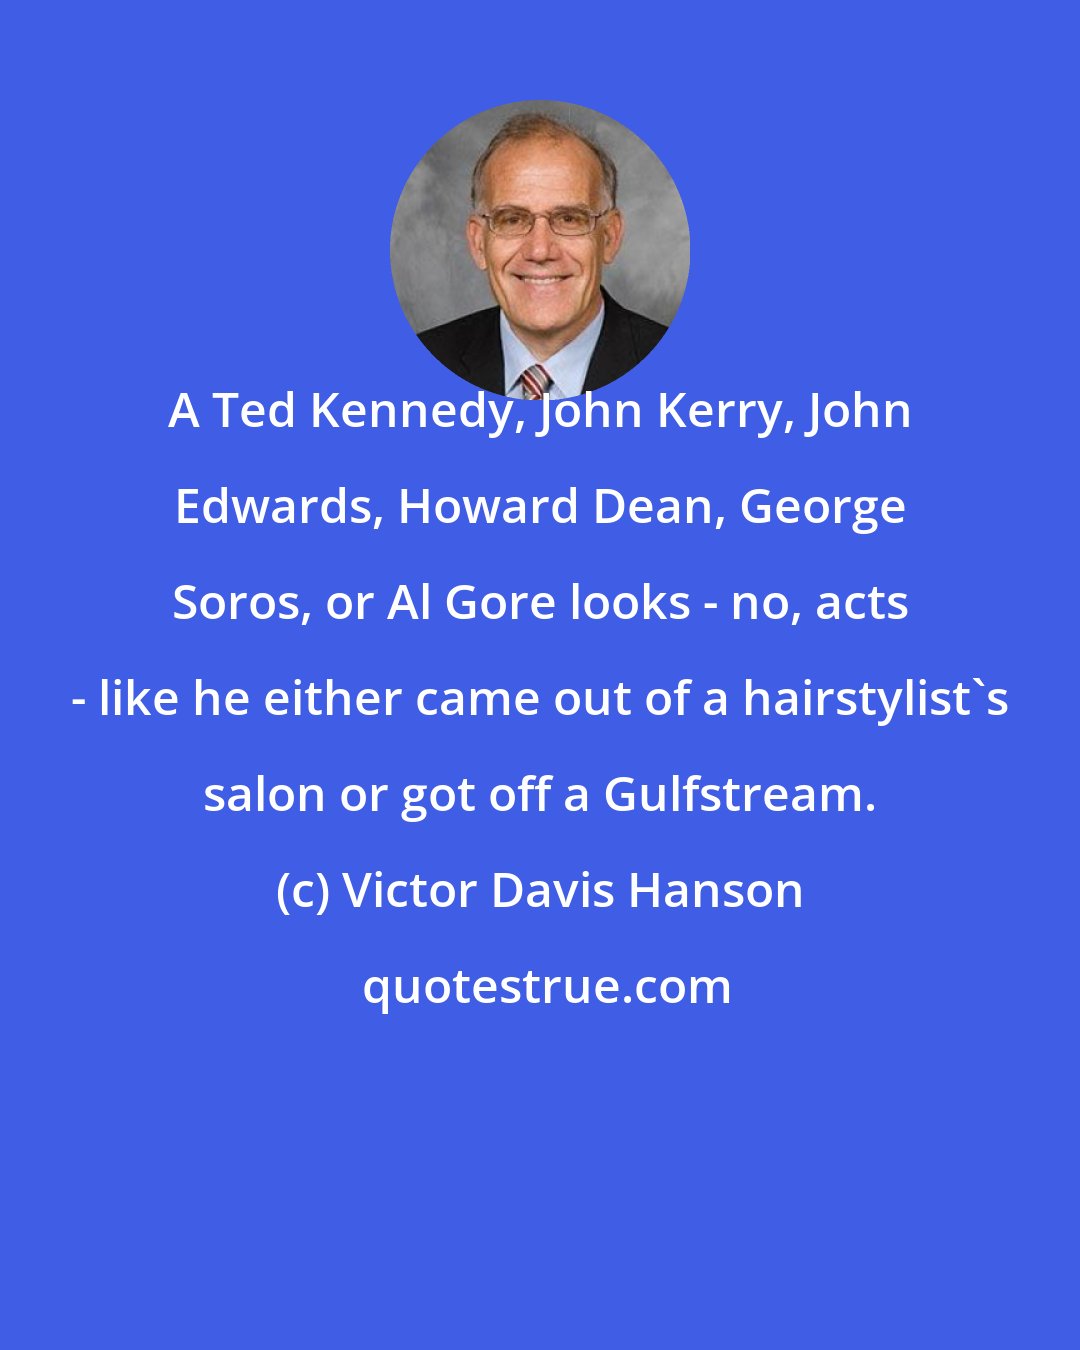 Victor Davis Hanson: A Ted Kennedy, John Kerry, John Edwards, Howard Dean, George Soros, or Al Gore looks - no, acts - like he either came out of a hairstylist's salon or got off a Gulfstream.